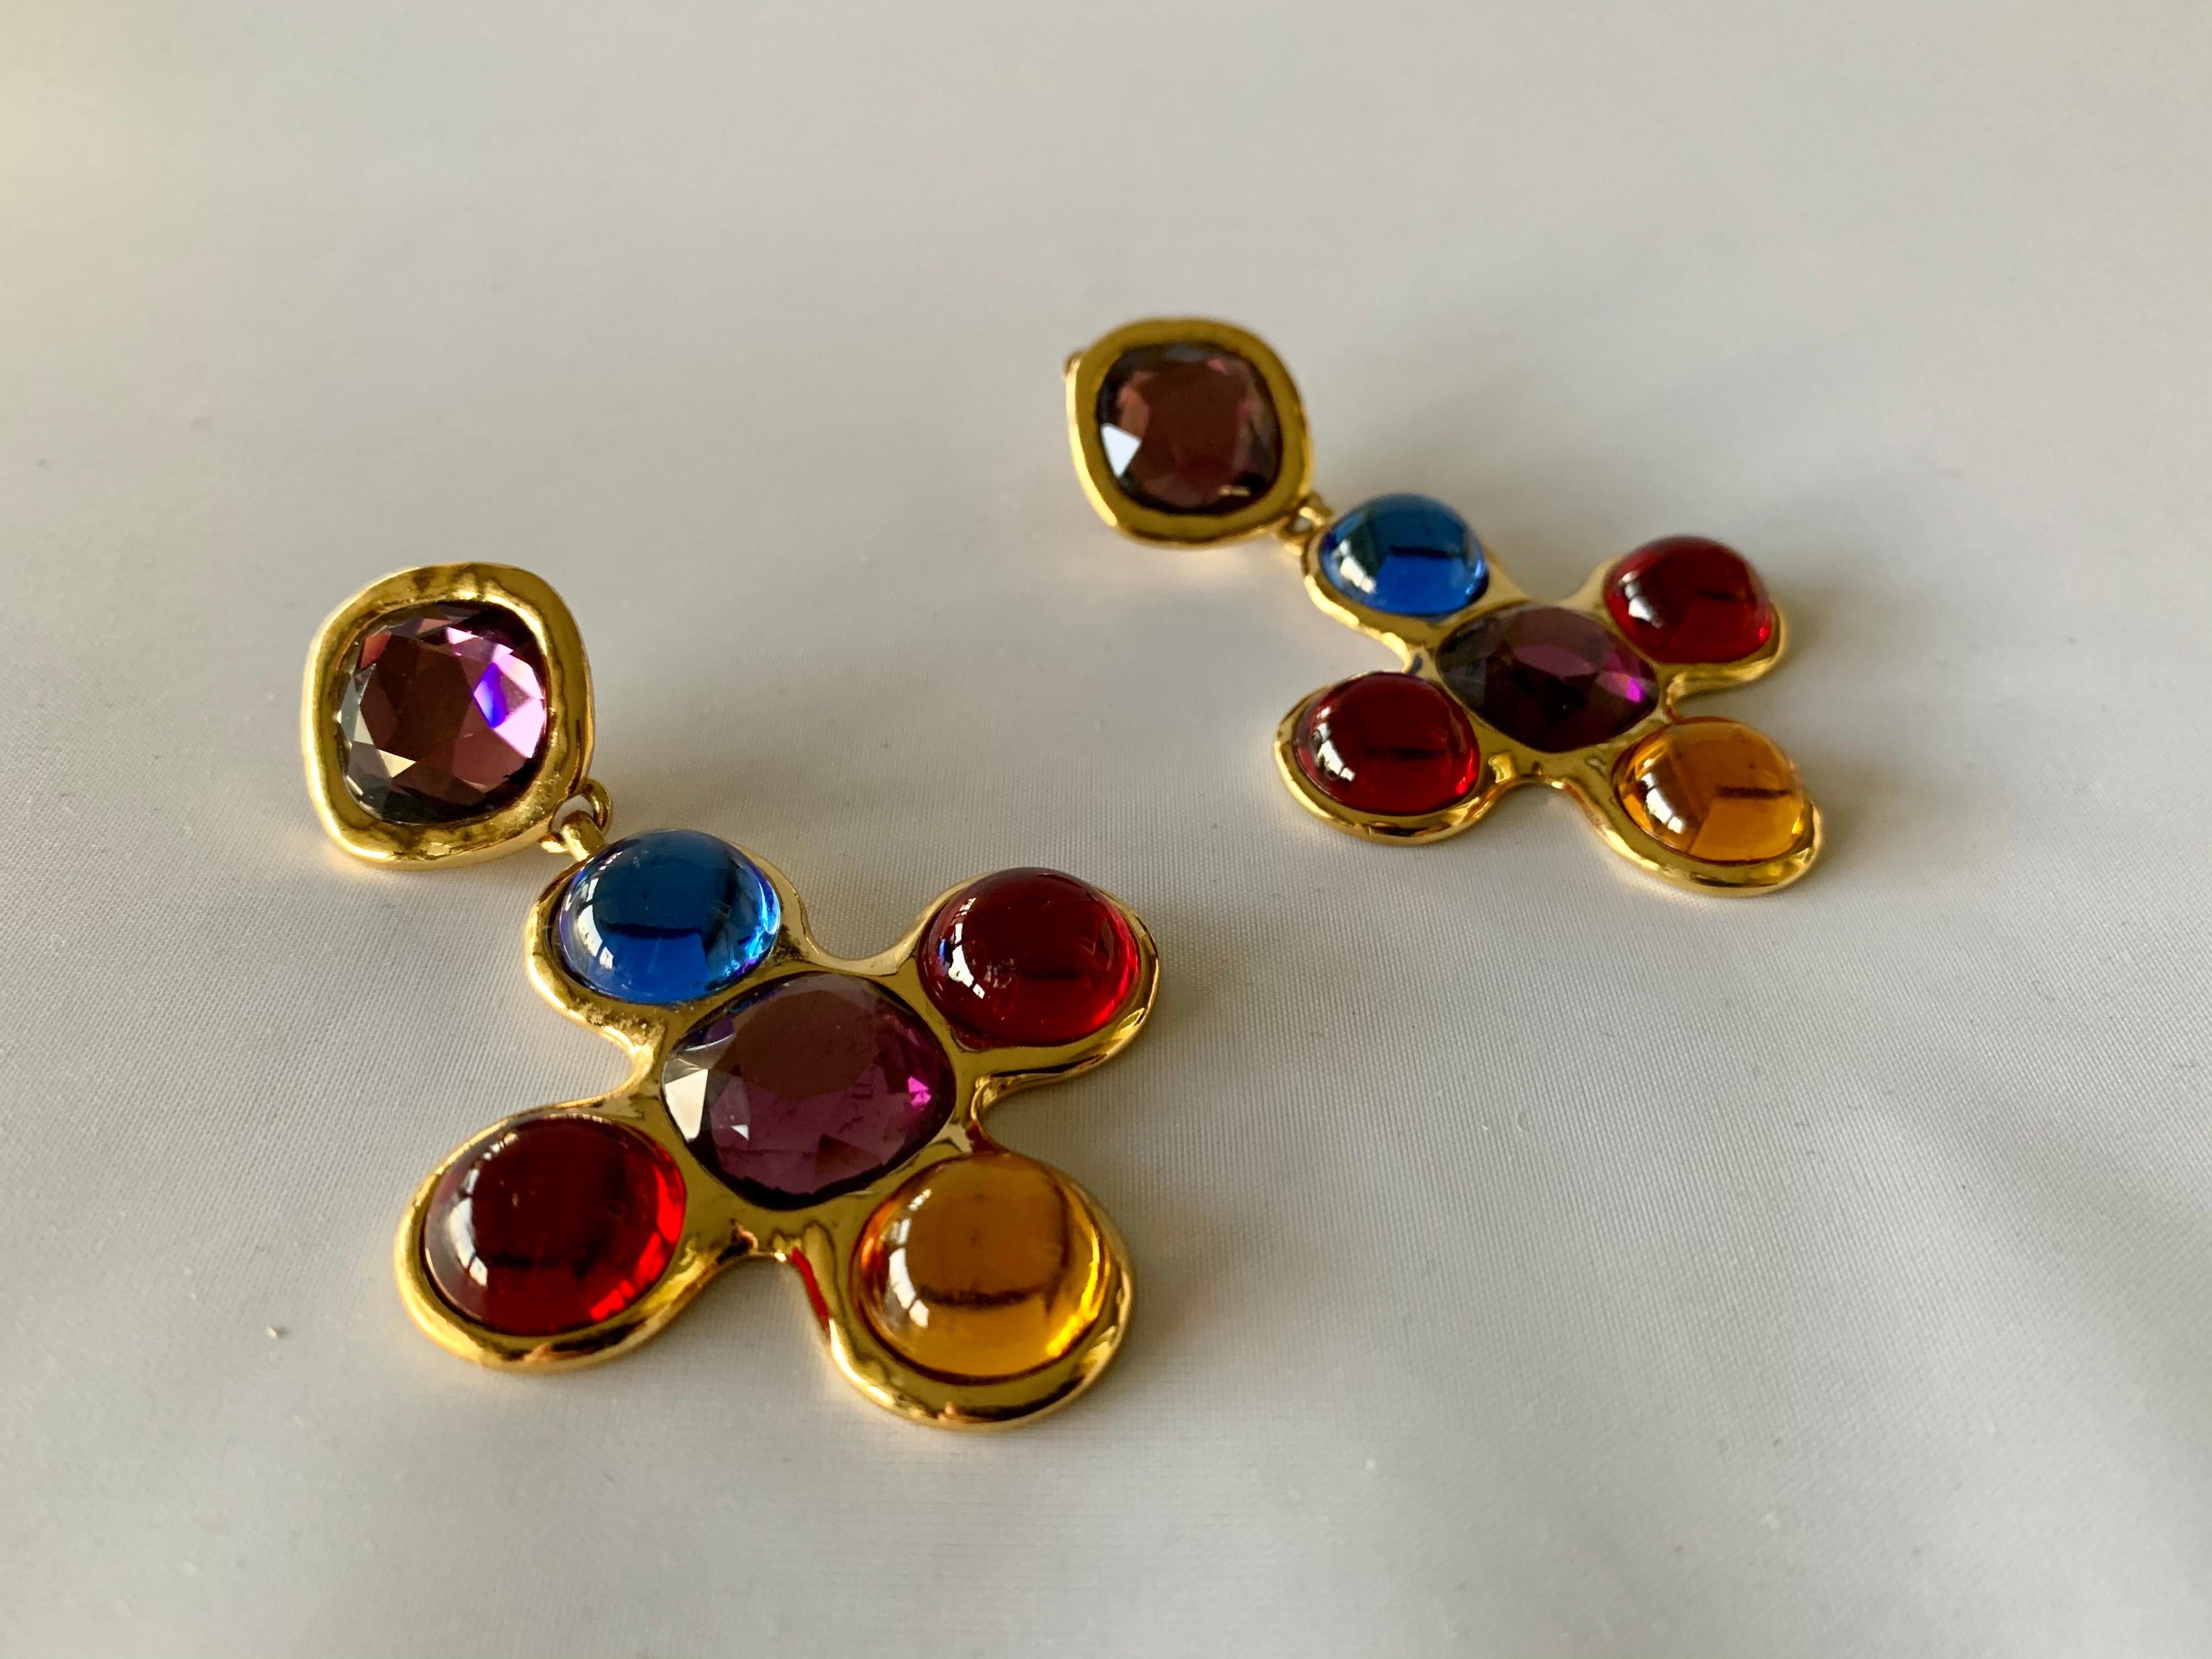 Scarce vintage Yves Saint Laurent gold multi-color cross statement clip-on dangle earrings, made in France by Robert Goossens, circa 1980. The earrings feature faceted and domed glass cabochons in (blue, purple, red, and yellow) are signed YSL, made